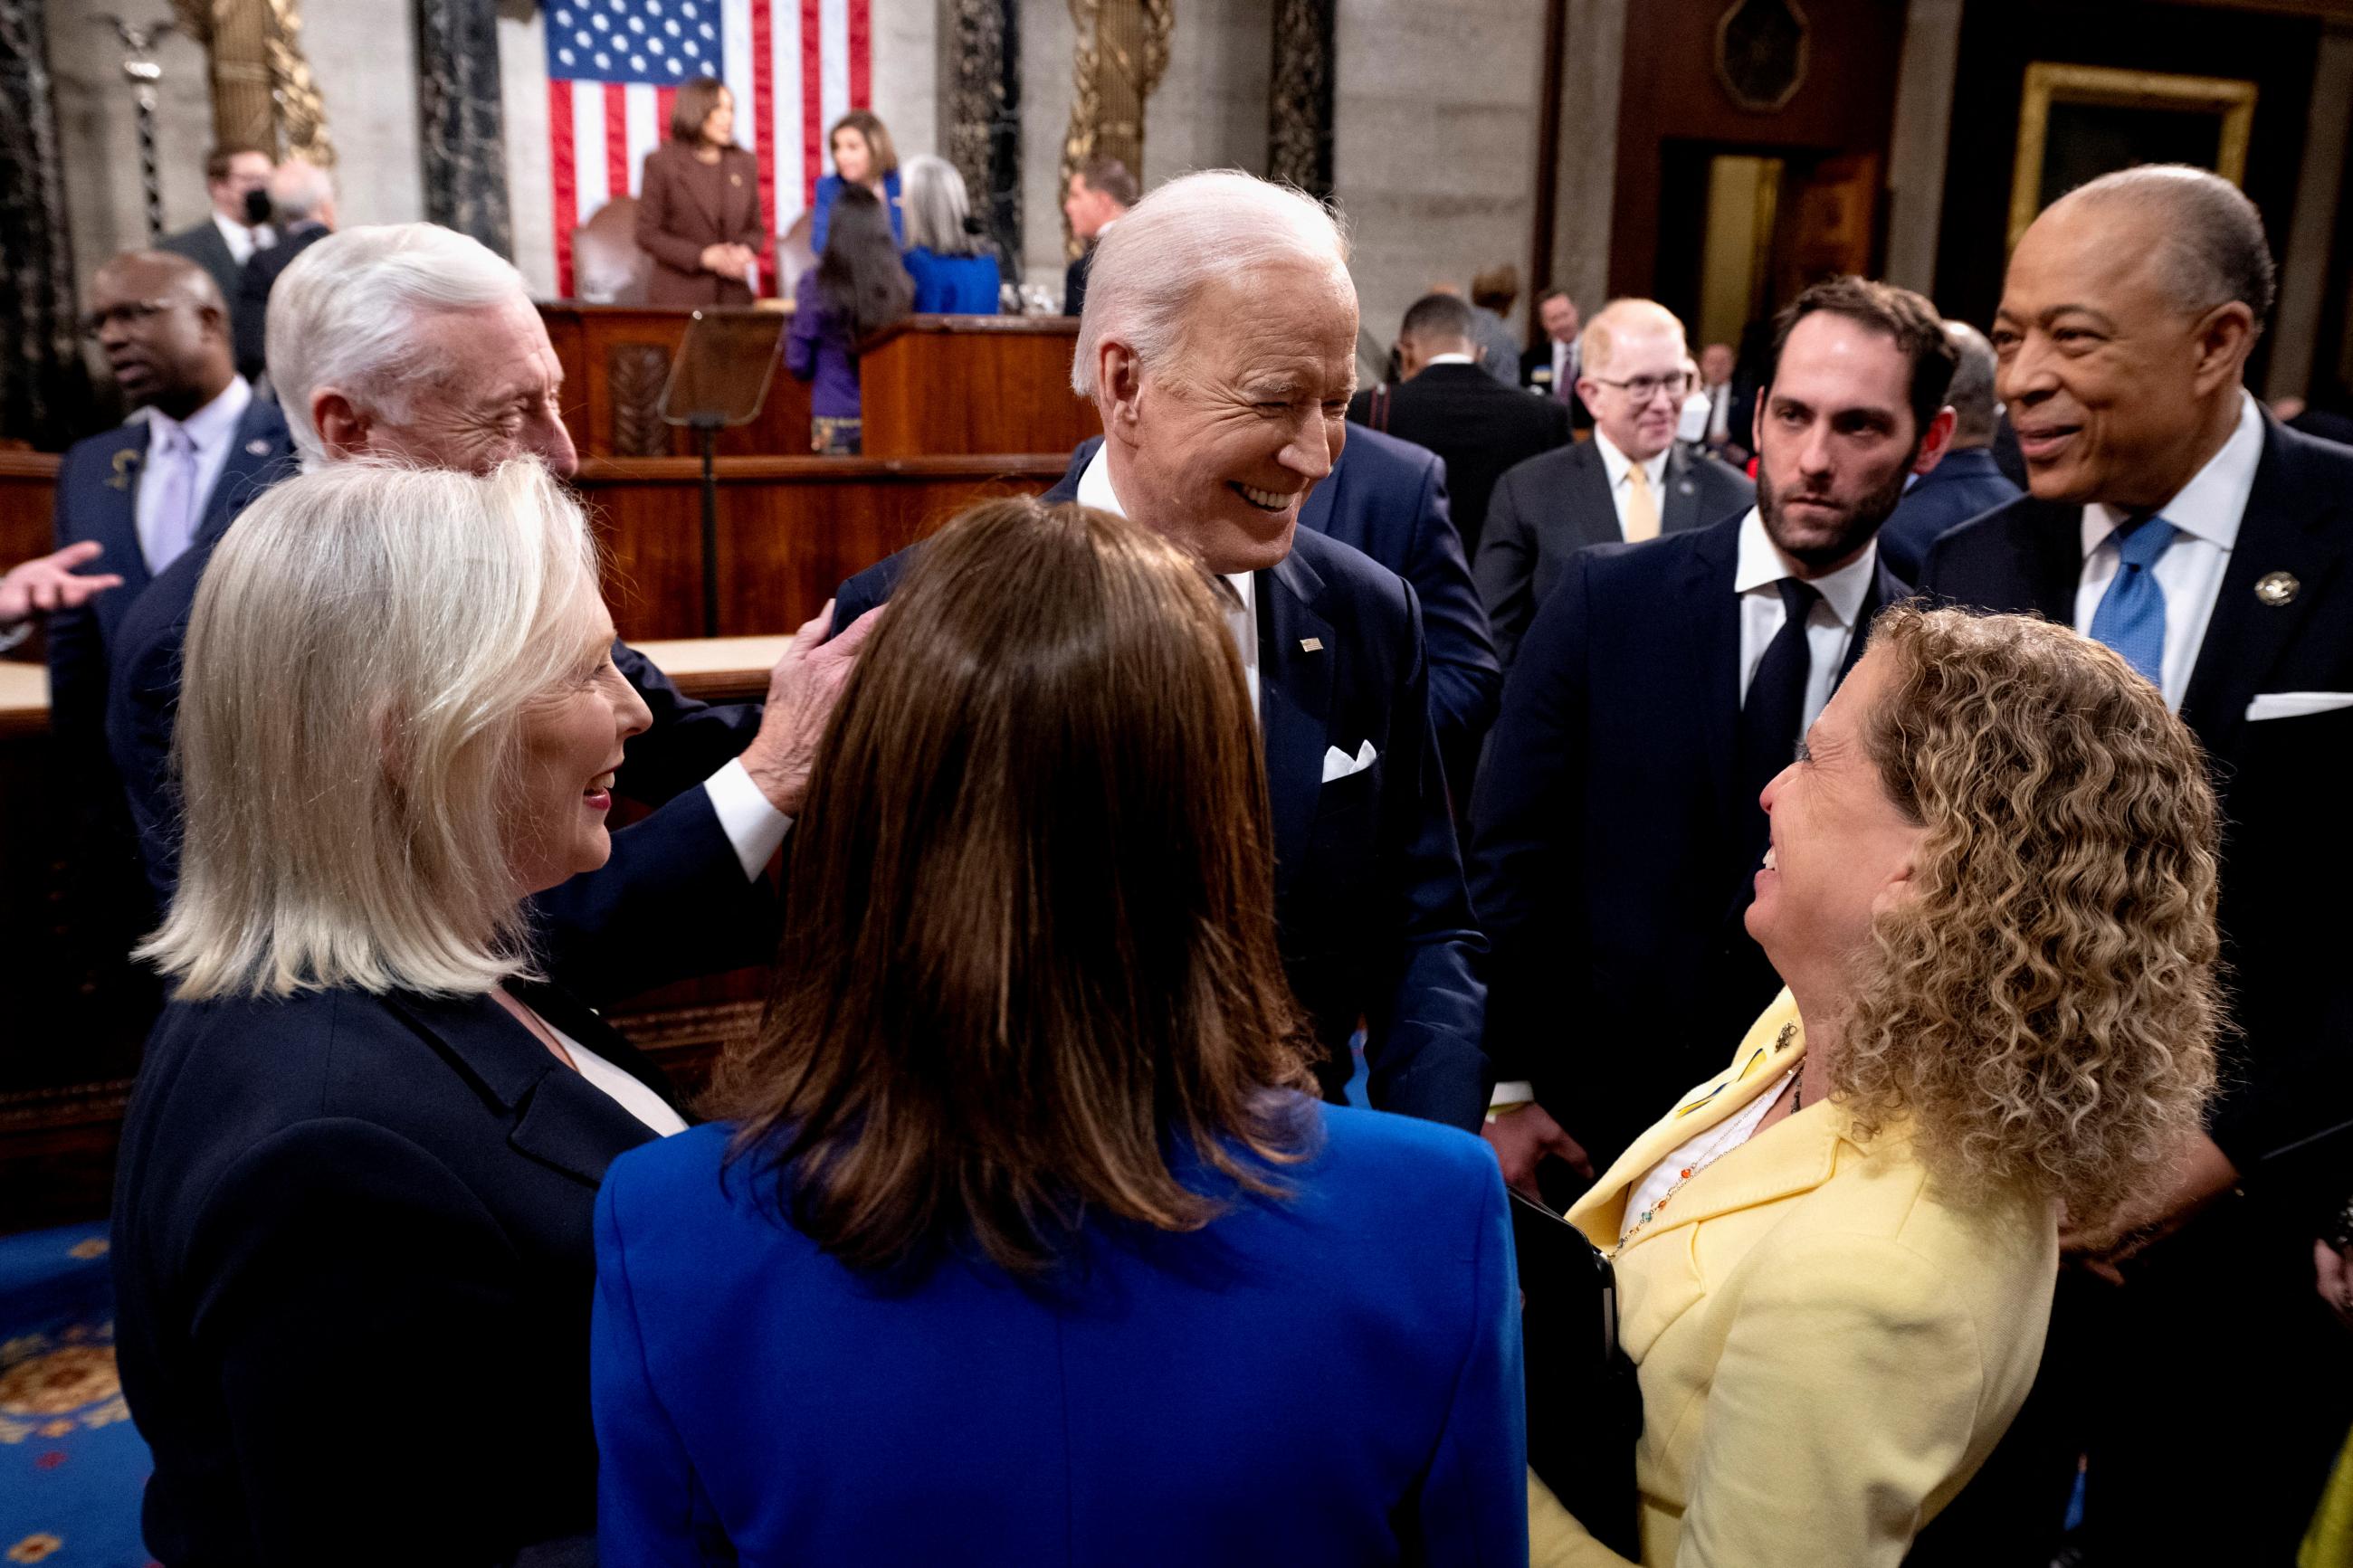 U.S. President Joe Biden speaks with members of Congress after delivering the State of the Union address to a joint session of Congress in Washington, DC, on March 1, 2022. 